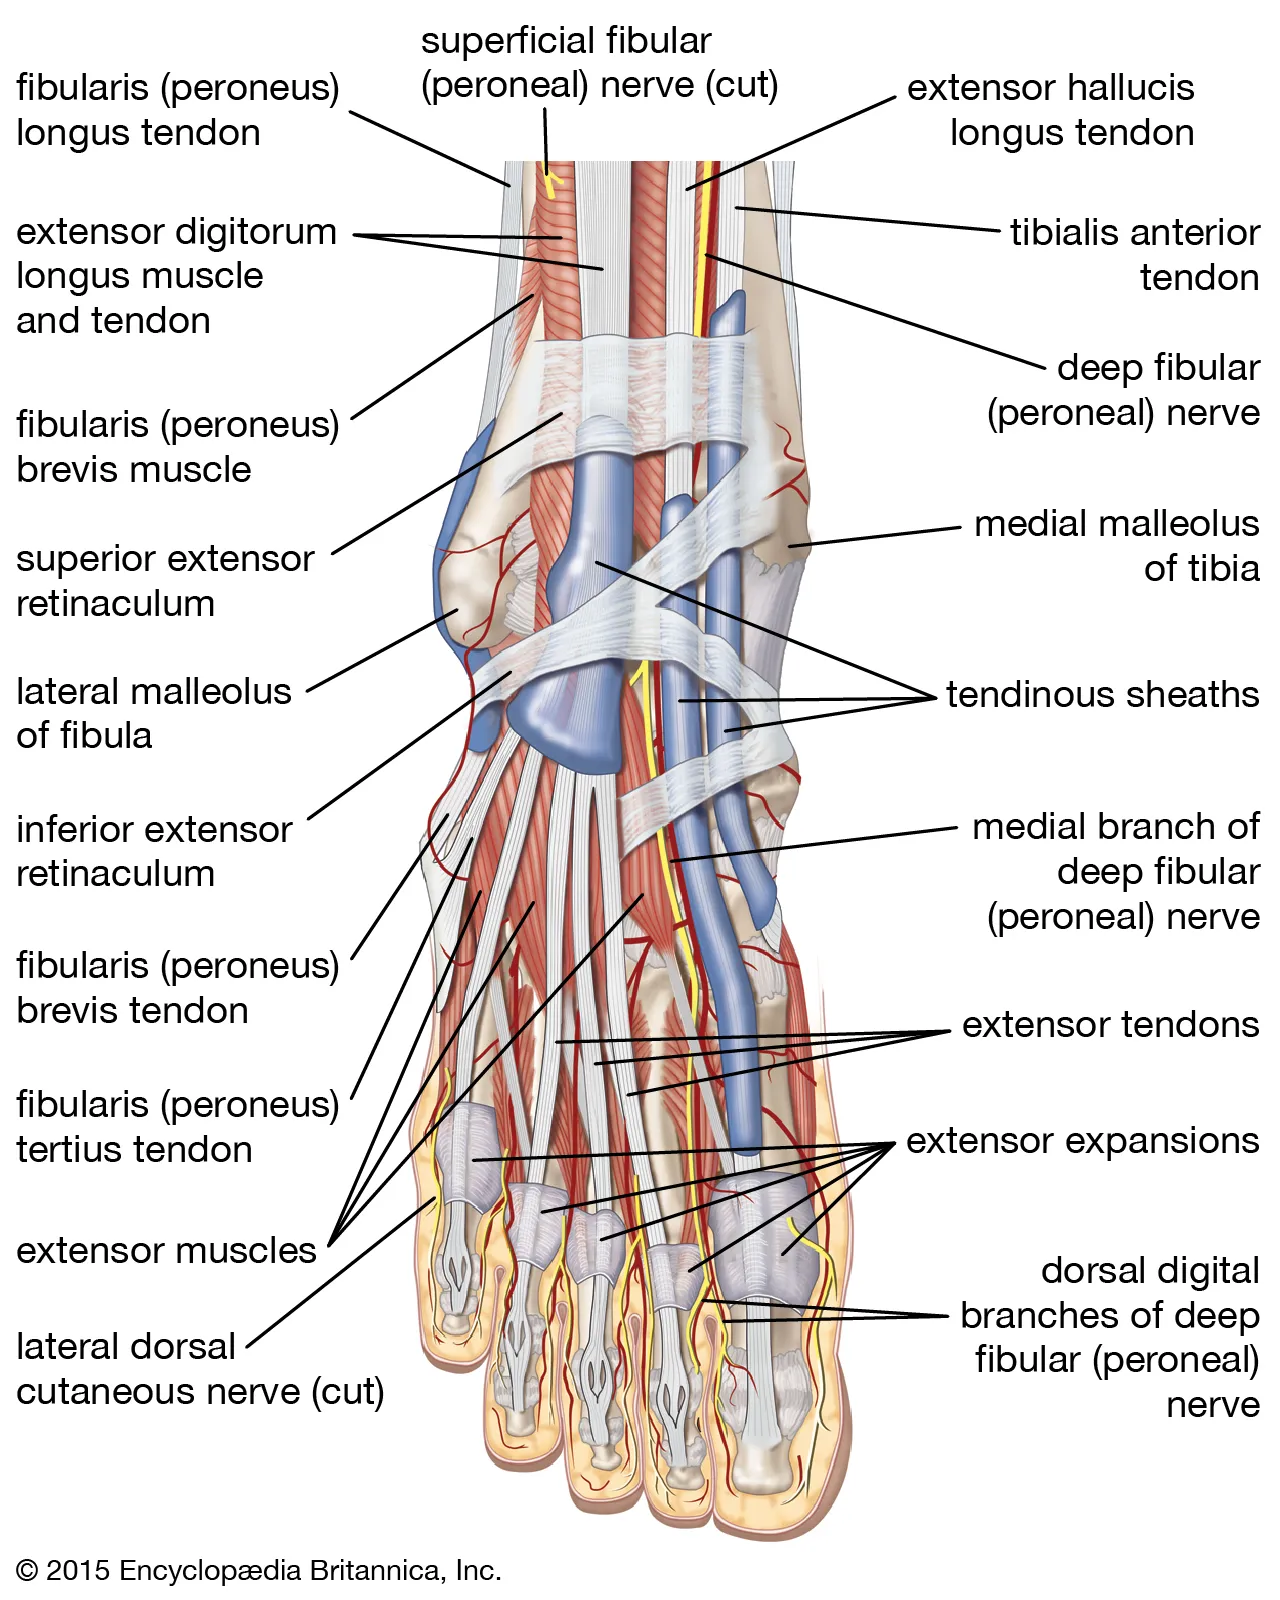 Many nerves, tendons and blood vessels go between the ankle and the toes.Source: Encyclopædia Britannica.